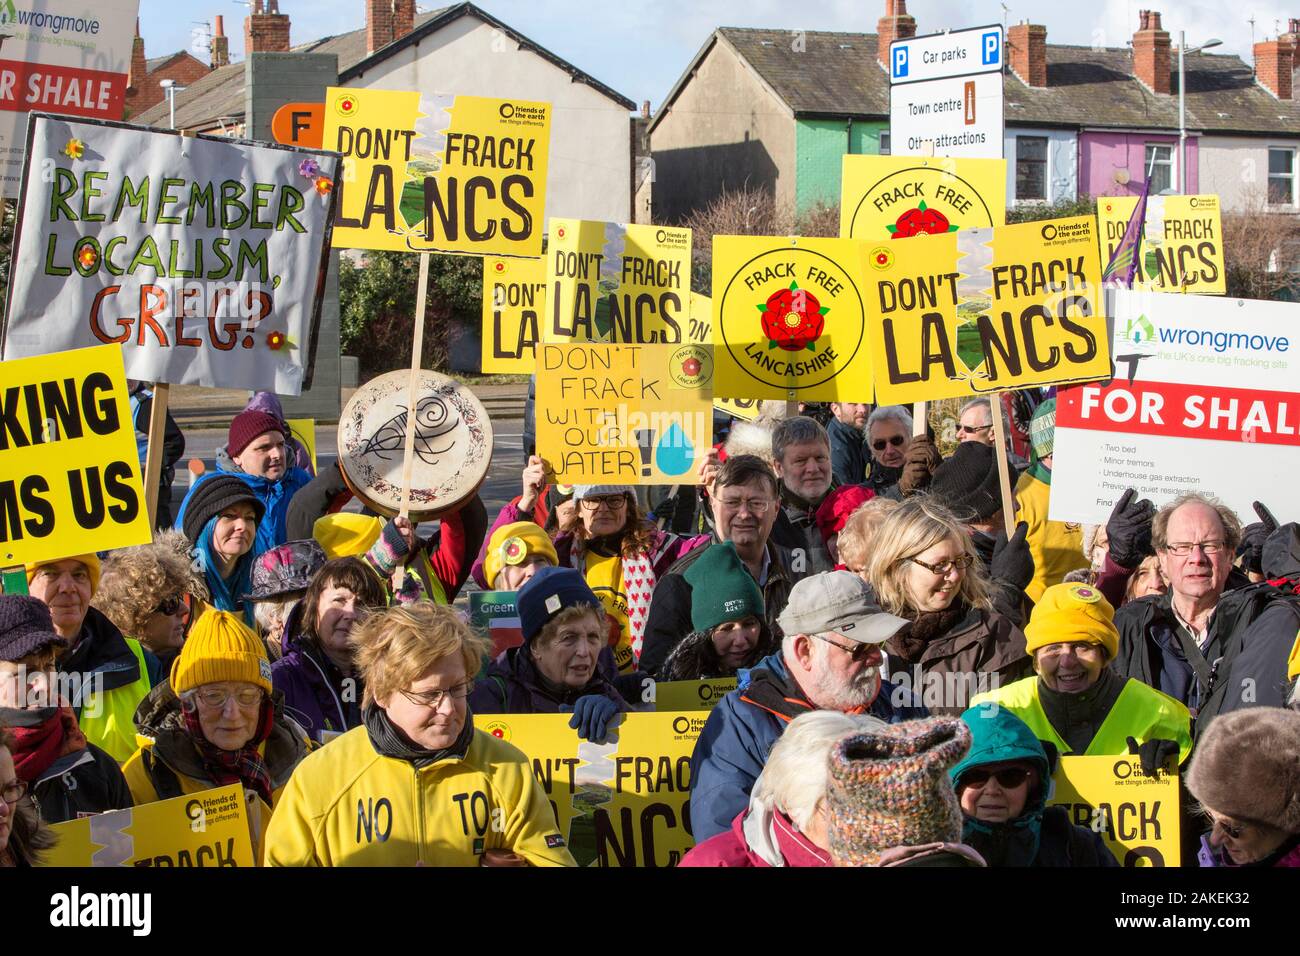 Protesters campaigning against fracking by Cuadrilla, as Cuadrilla appeals the local council decision not to allow fracking. Lancashire, England, UK, February 2016. Stock Photo